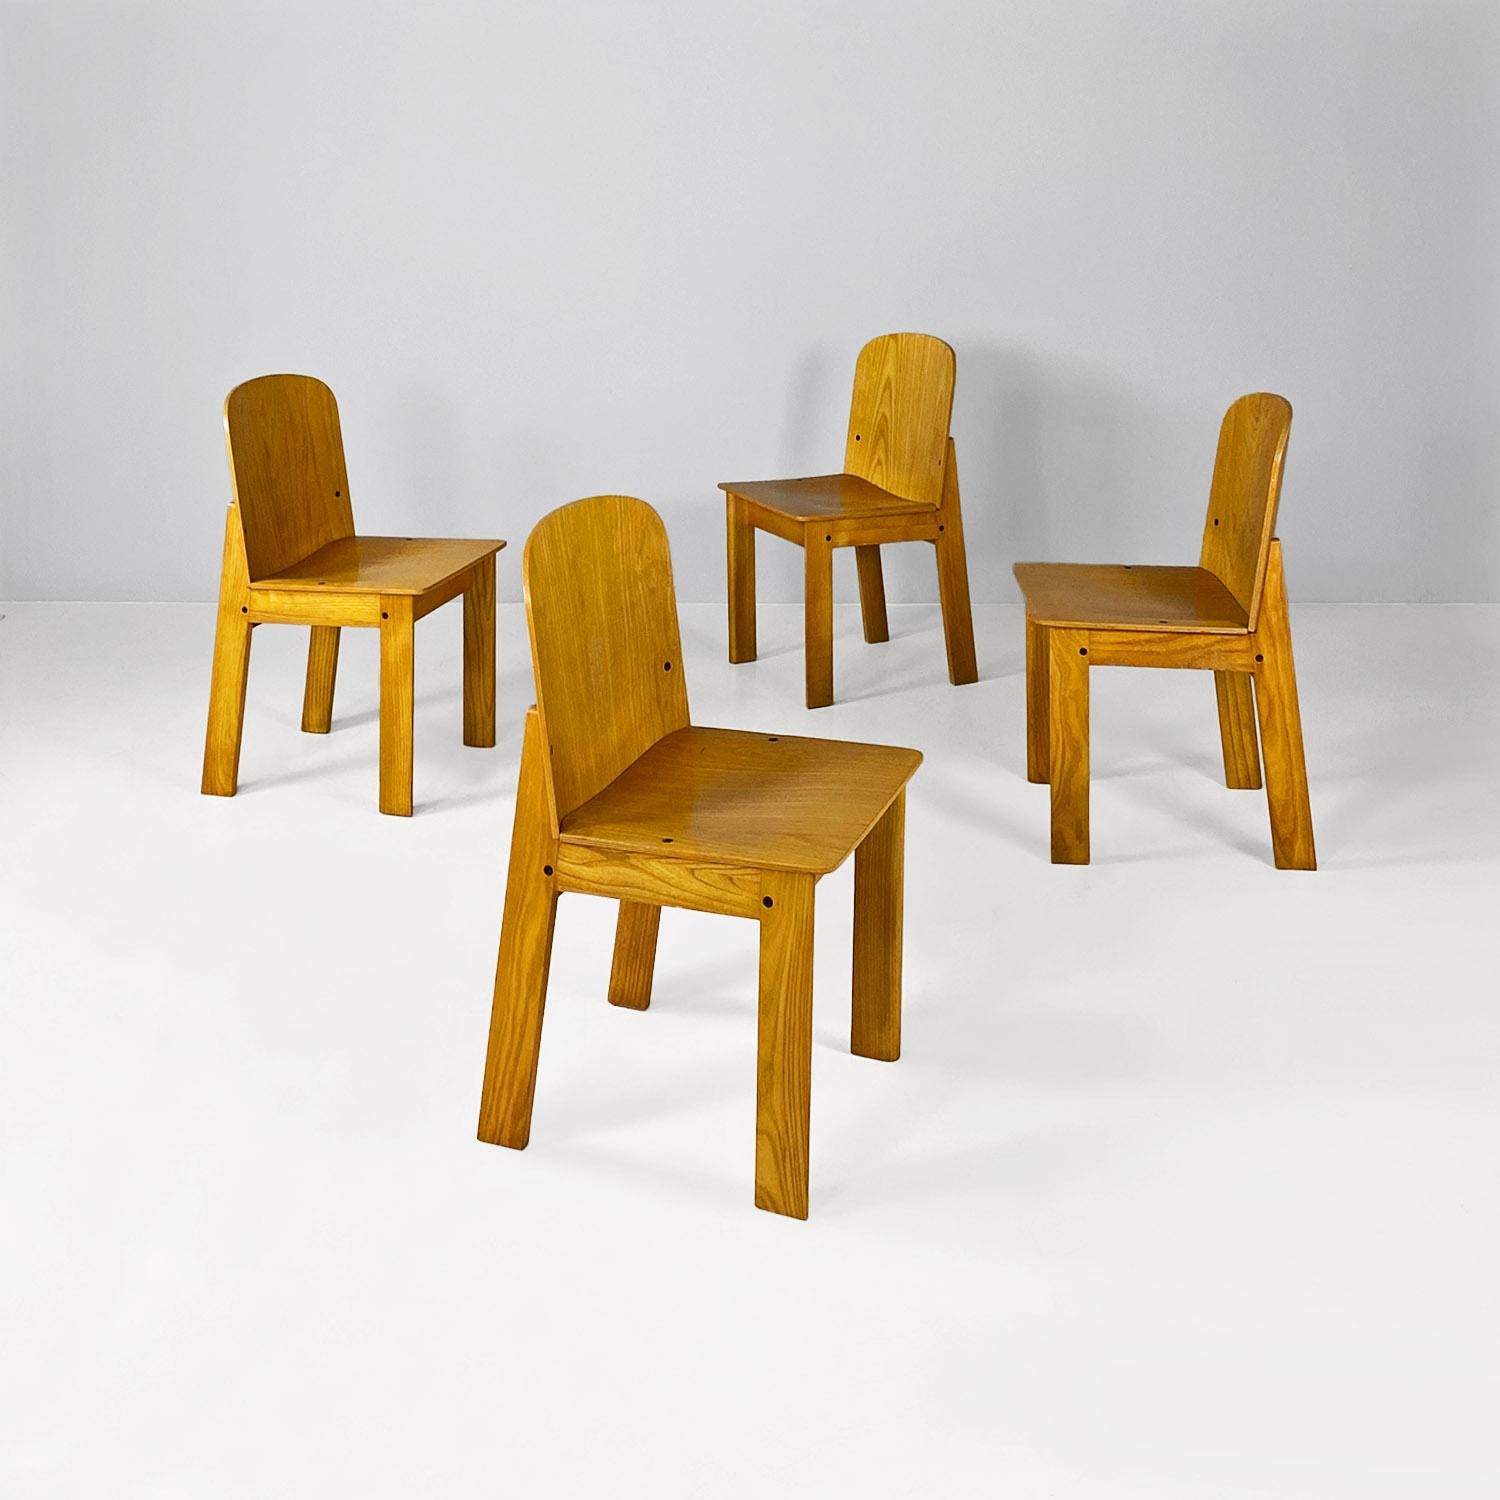 Italian modern set of four solid wood chairs, 1980s
Set of four chairs with structure entirely in solid wood.
1980 approx.
Good conditions
Measurements in 43x46x76h cm and seat 42h cm
Not sold separately.
Beautiful set of four dining chairs, in